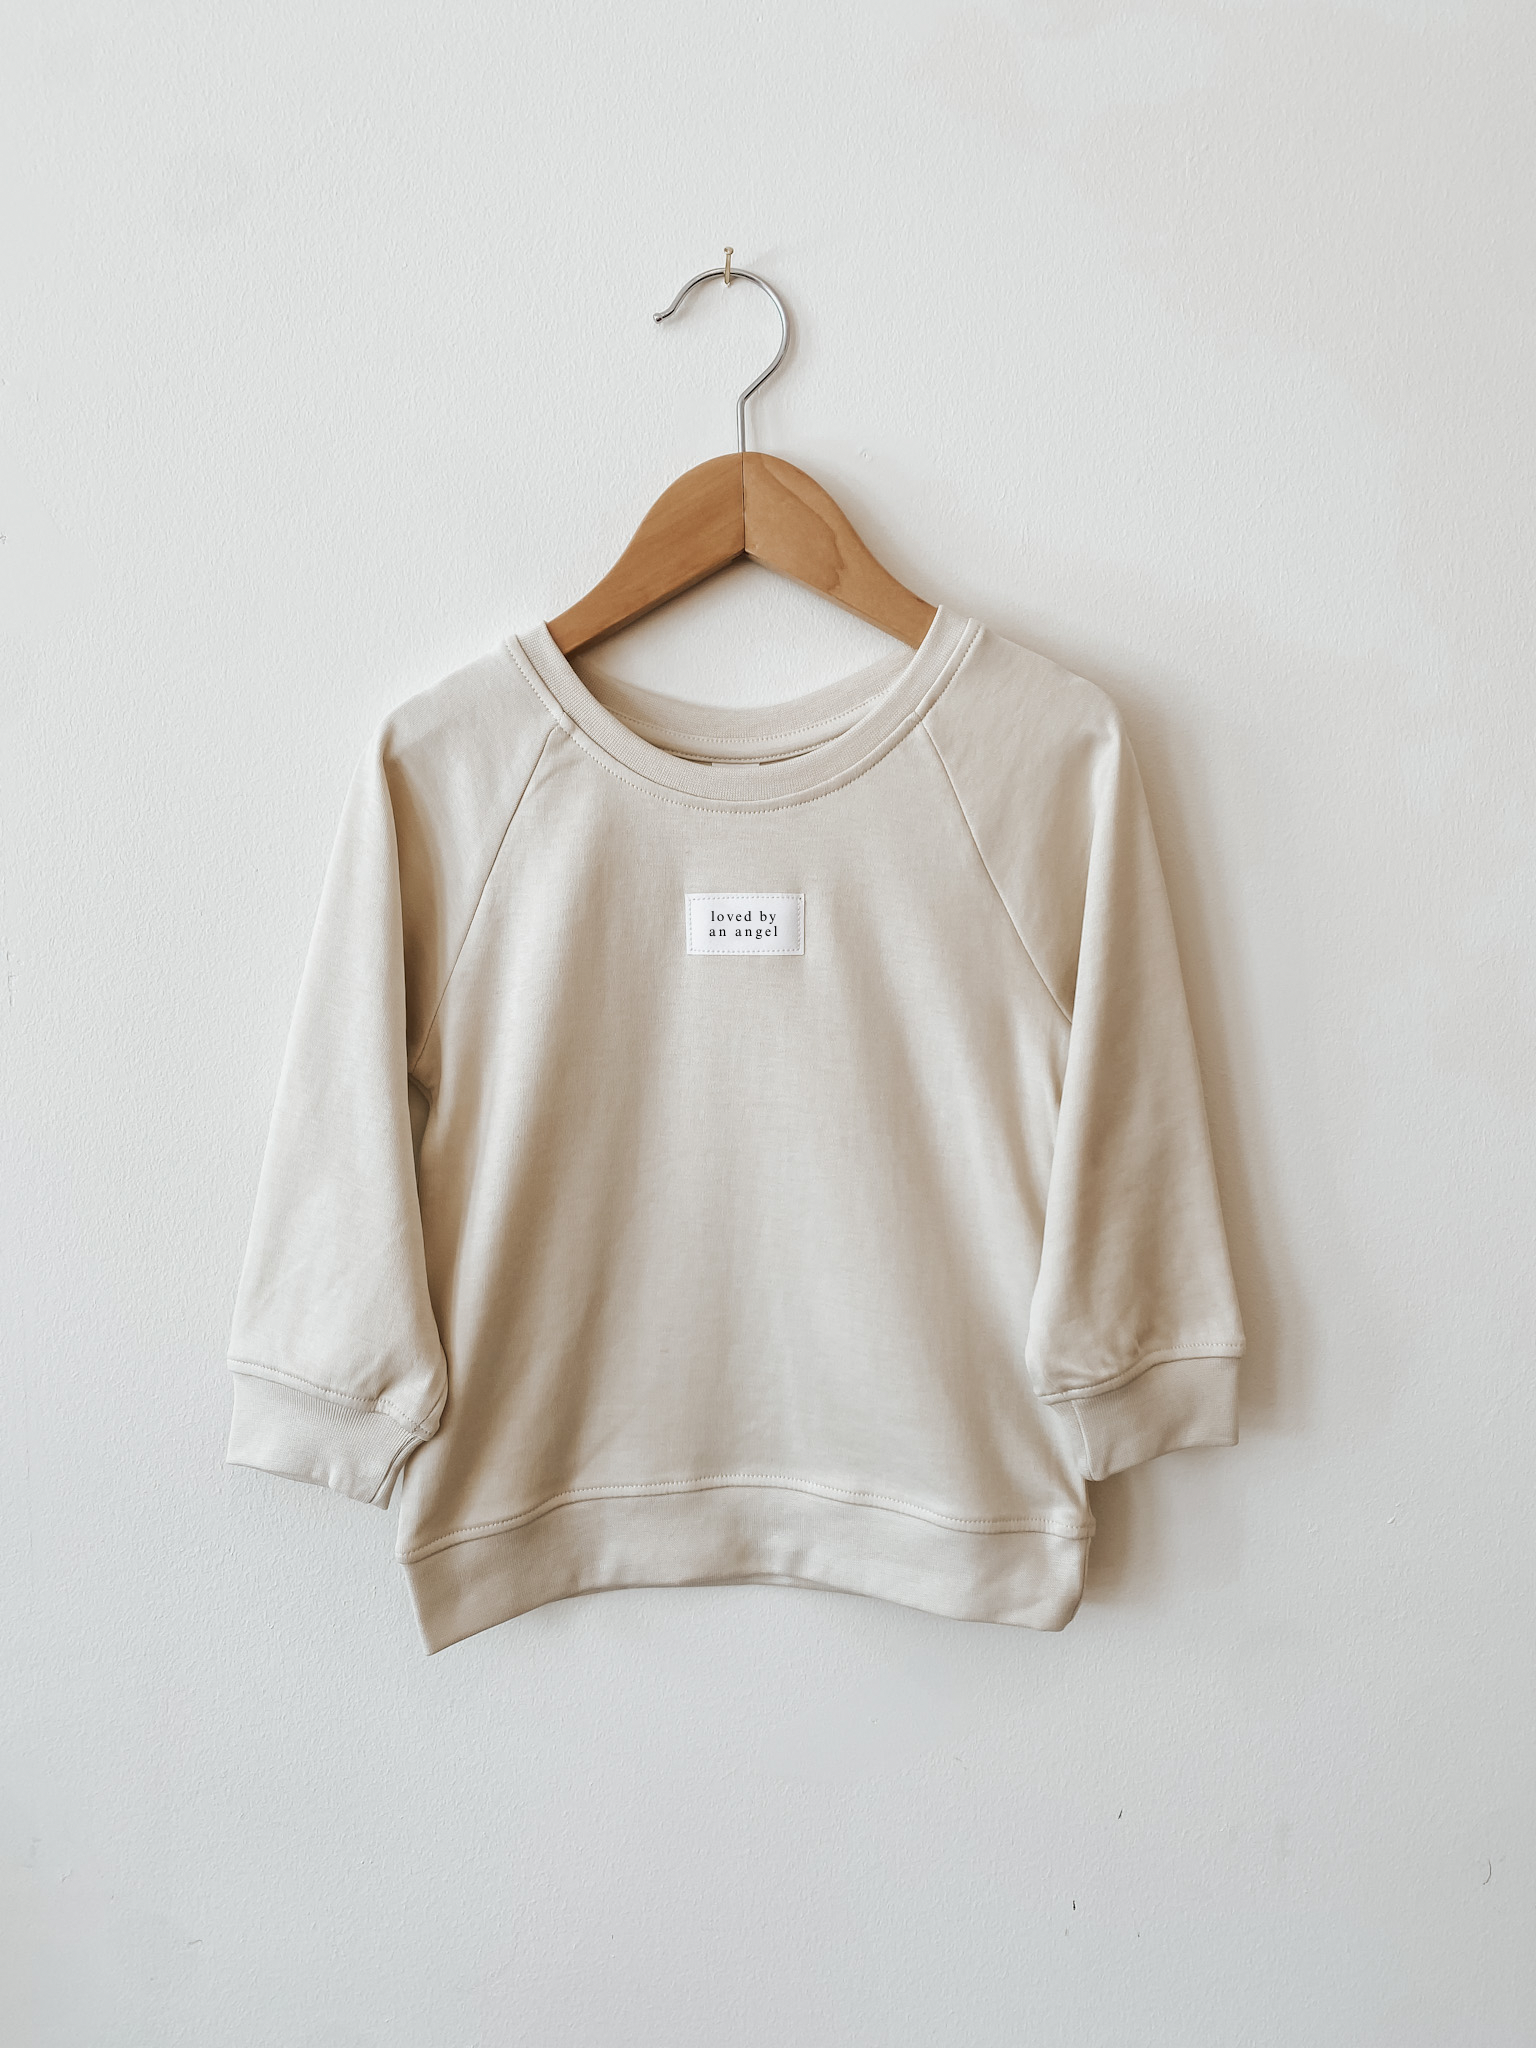 Classic Crewneck | Loved By An Angel